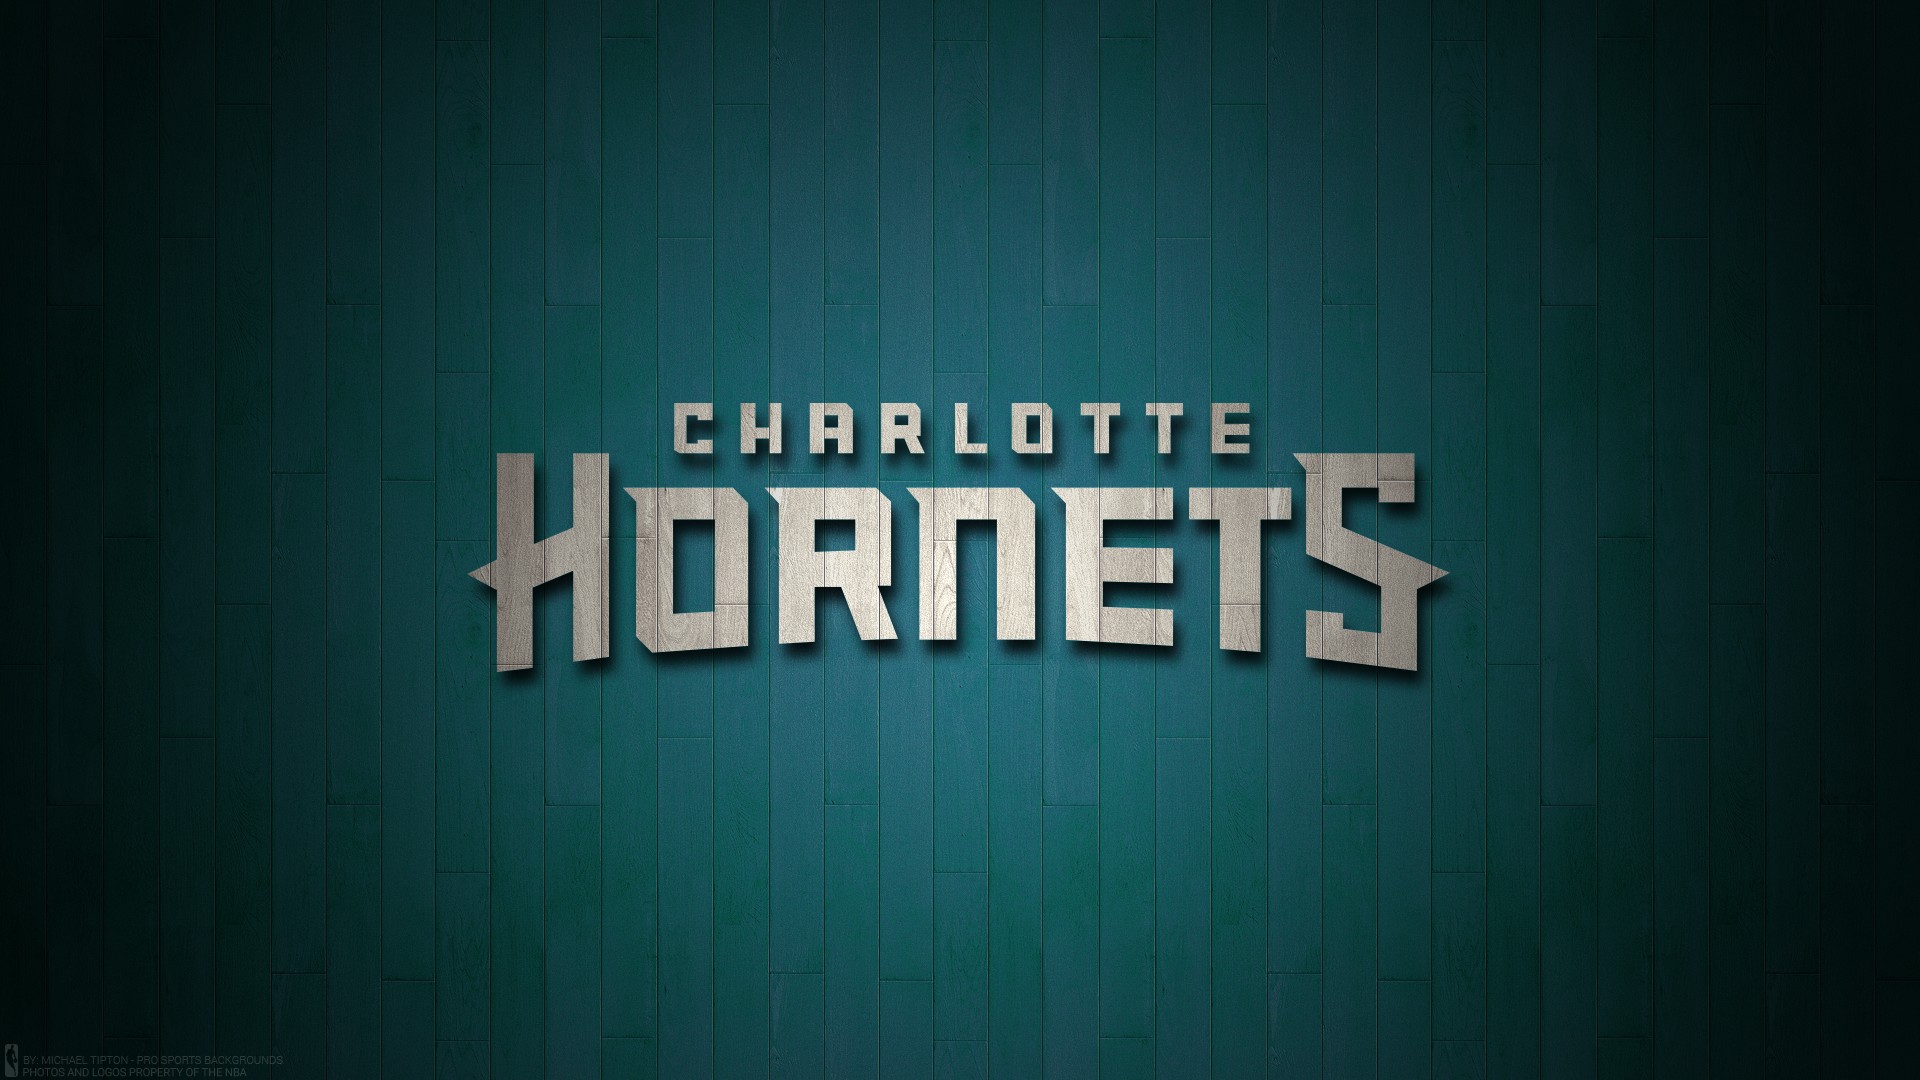 Wallpapers HD Charlotte Hornets with high-resolution 1920x1080 pixel. You can use this wallpaper for your Desktop Computer Backgrounds, Windows or Mac Screensavers, iPhone Lock screen, Tablet or Android and another Mobile Phone device